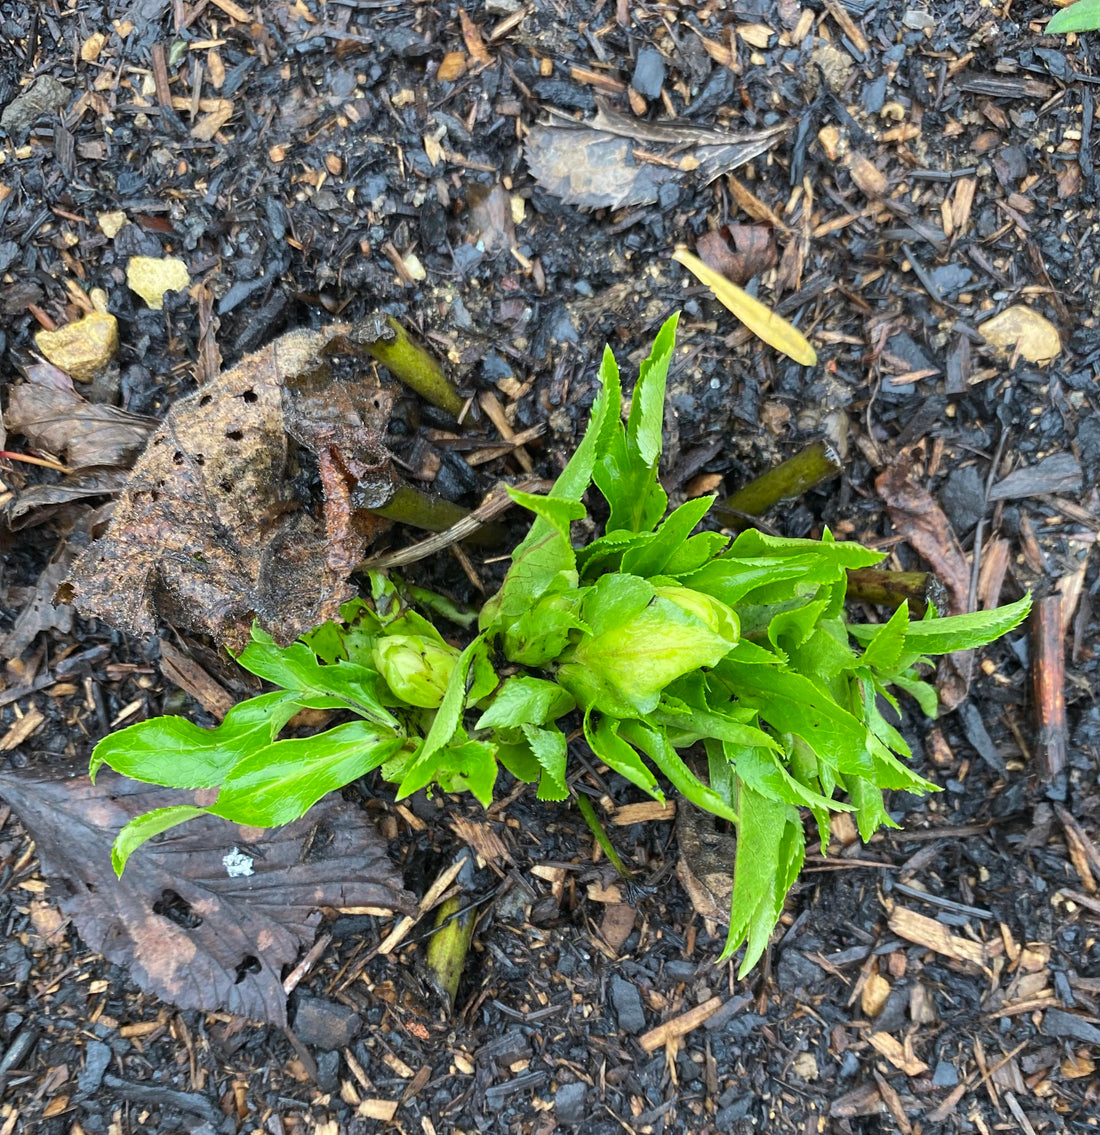 January Garden Notes – emerging signs of life…